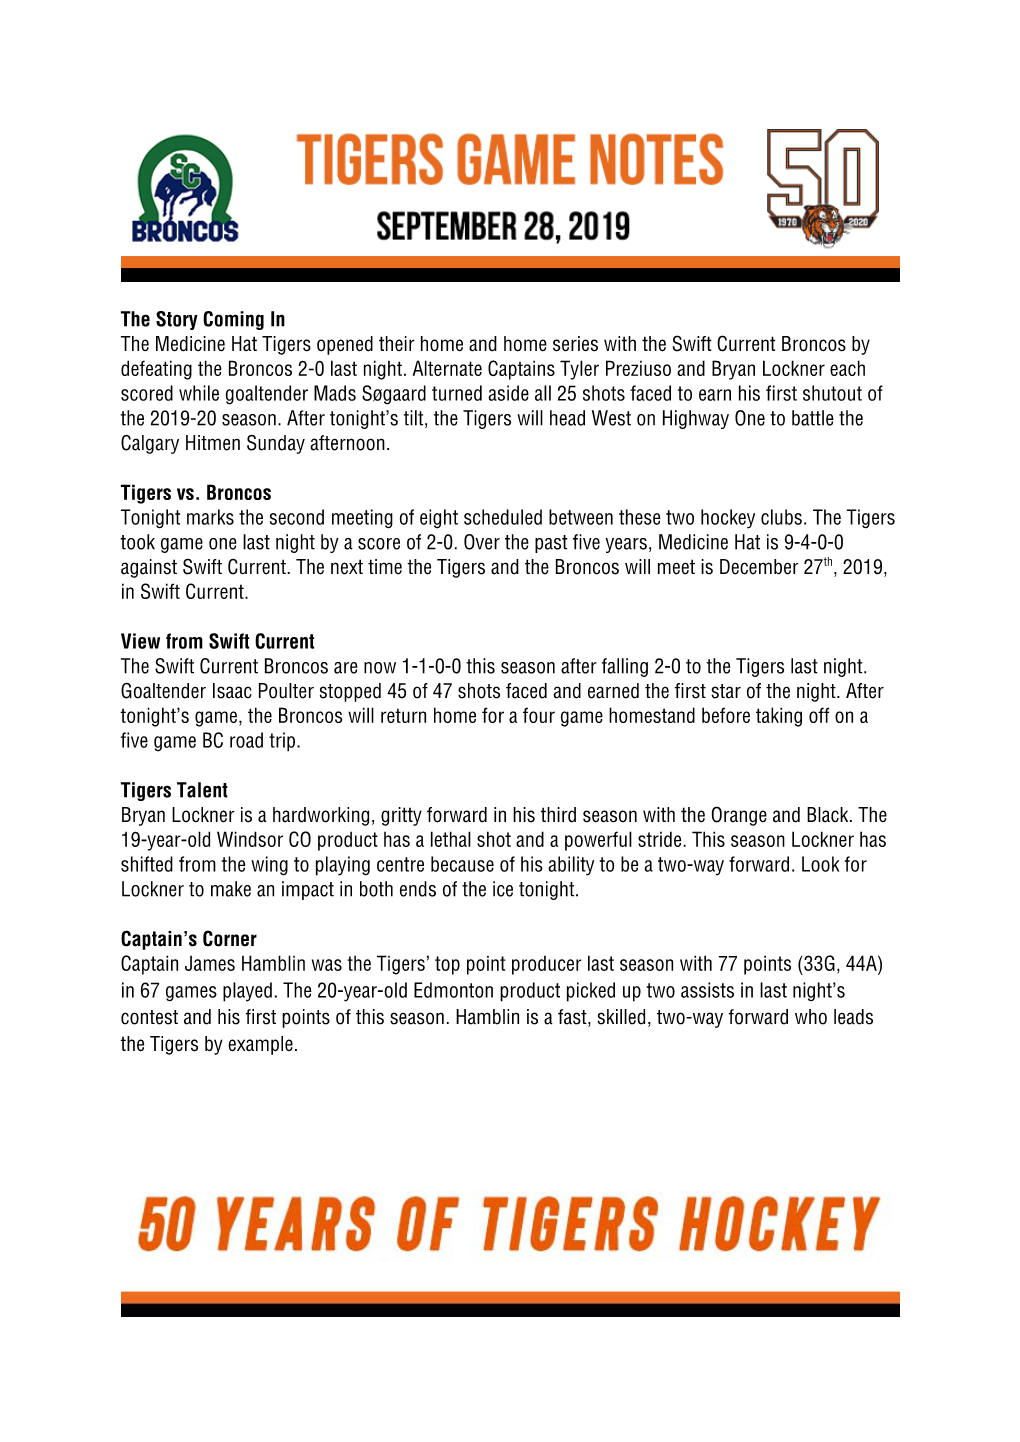 The Story Coming in the Medicine Hat Tigers Opened Their Home and Home Series with the Swift Current Broncos by Defeating the Broncos 2-0 Last Night